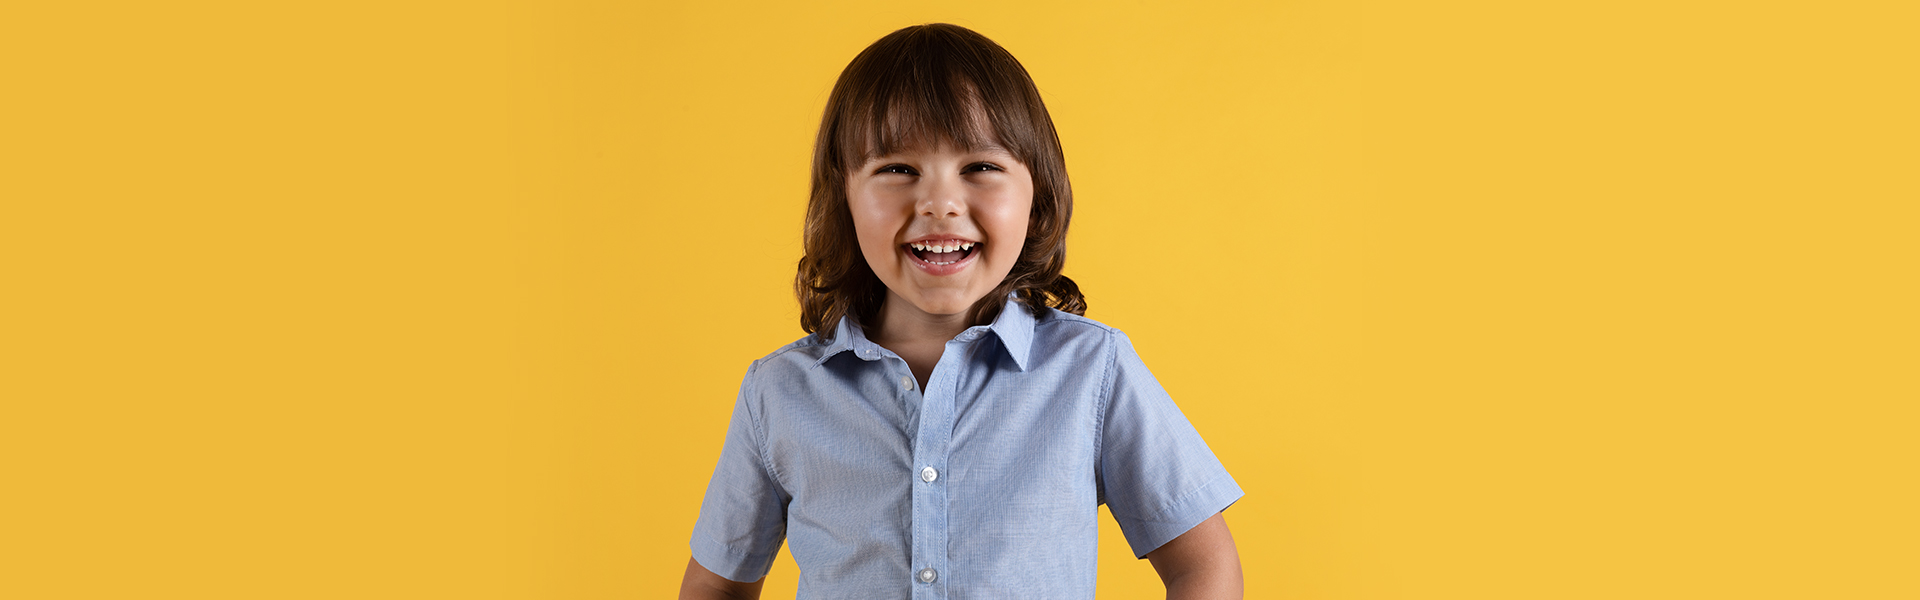 When Should You Make Your Child’s First Dentist Appointment?